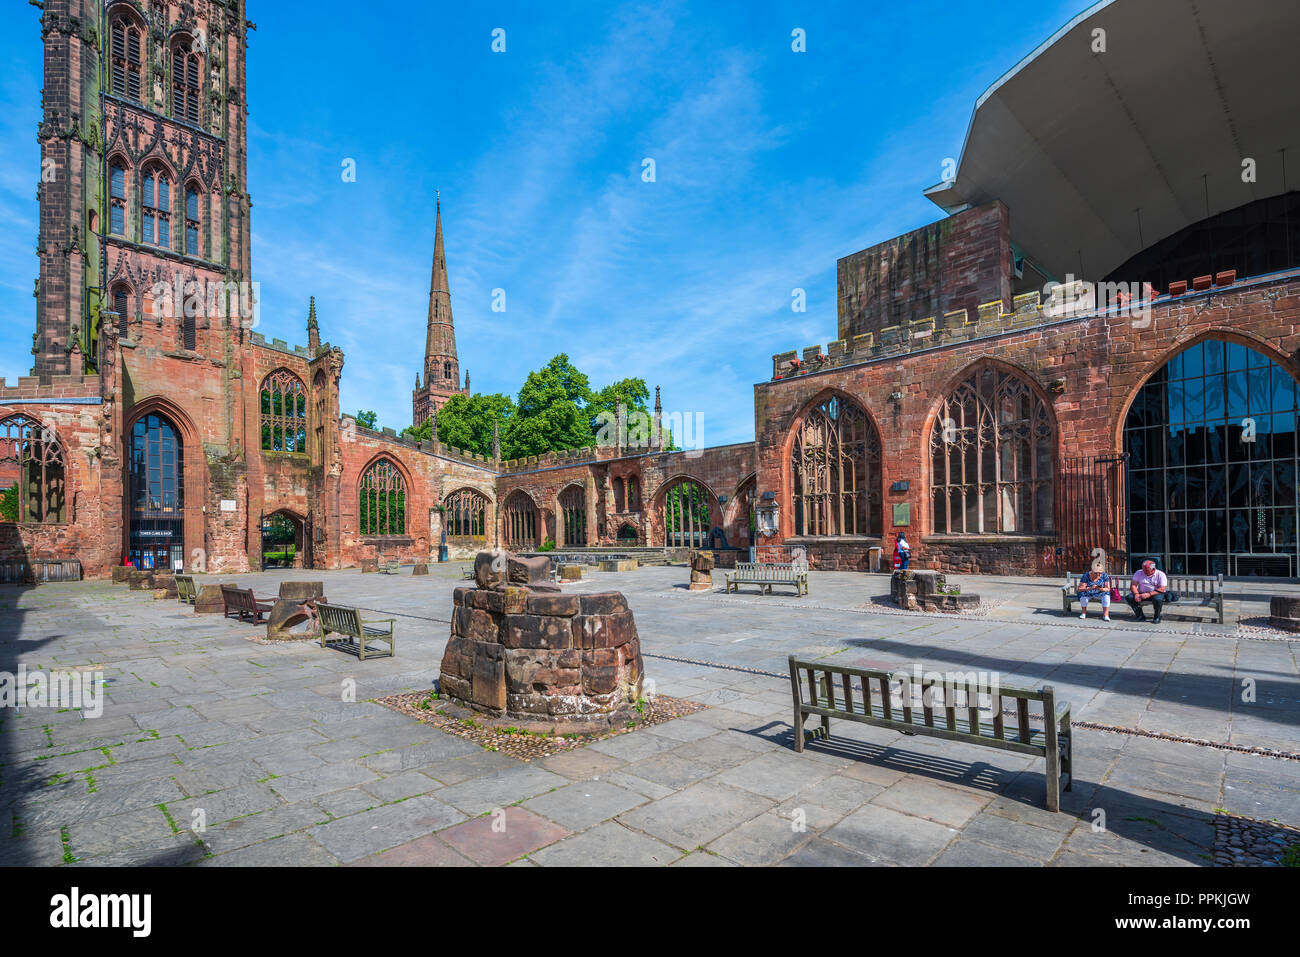 The ruins of the old cathedral, Coventry, West Midlands, England, United KIngdom, Europe Stock Photo